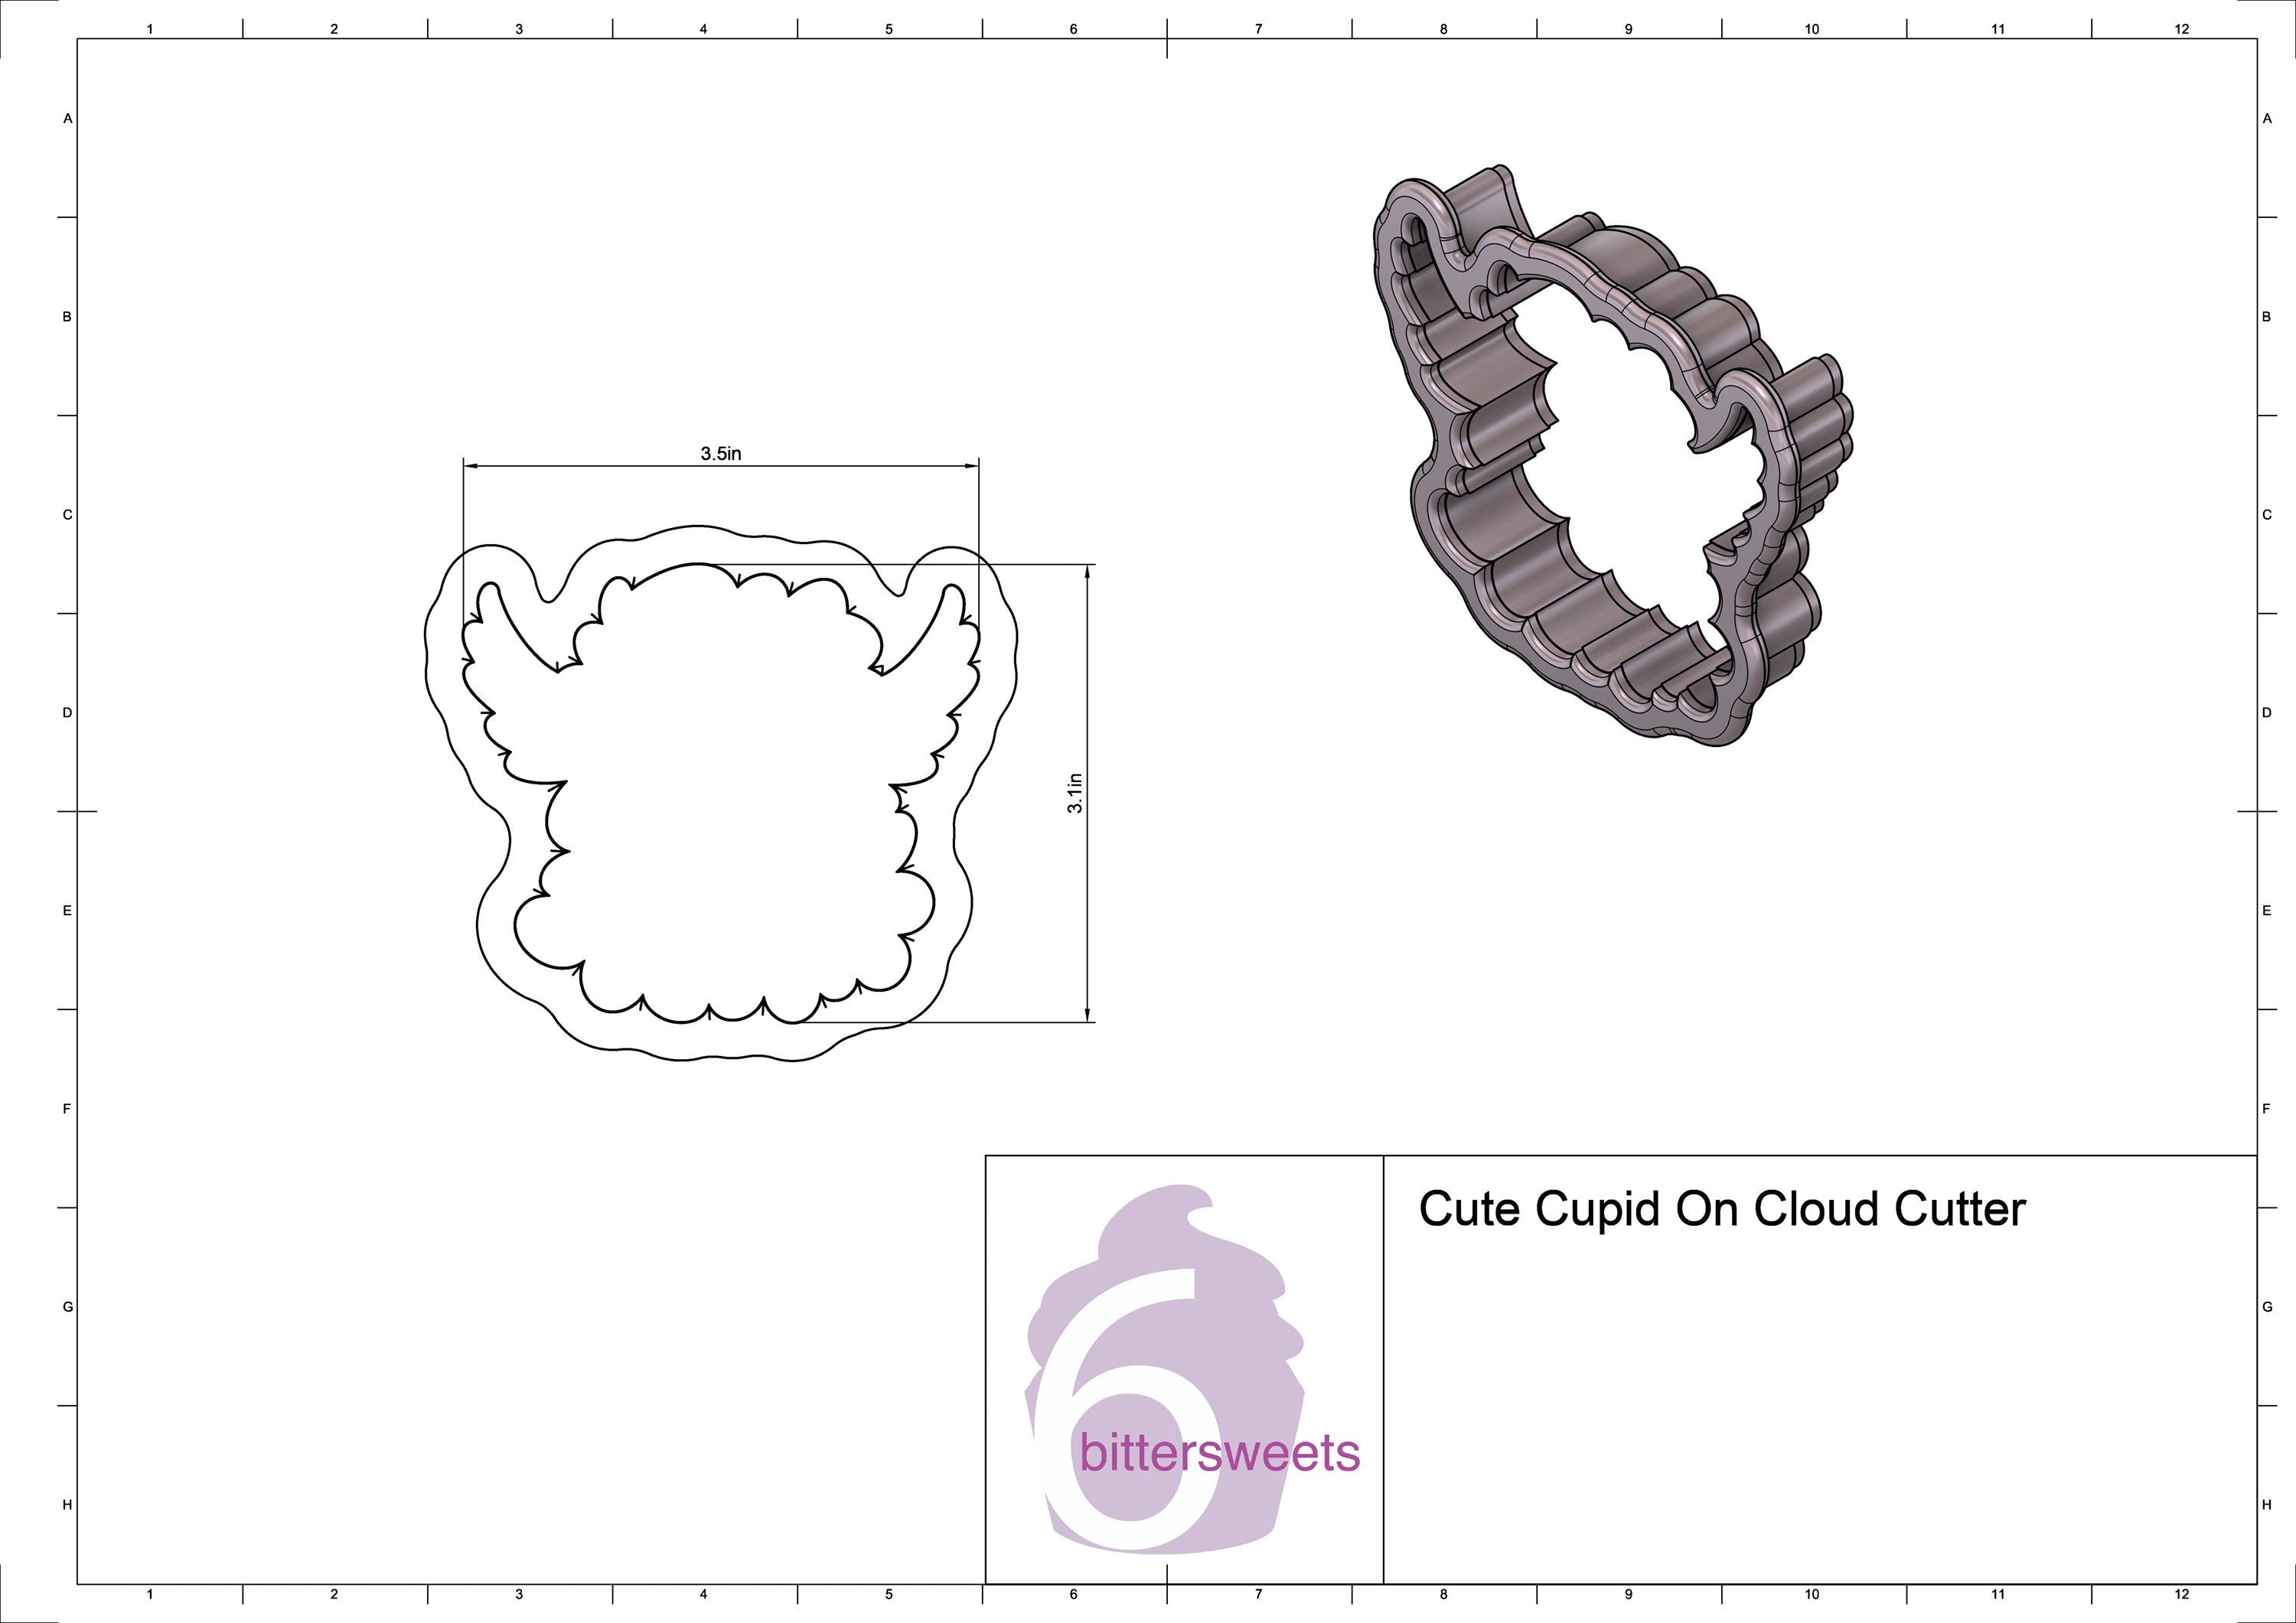 Cute Coffee Cup Cookie Cutter - 6 Bittersweets Cutters